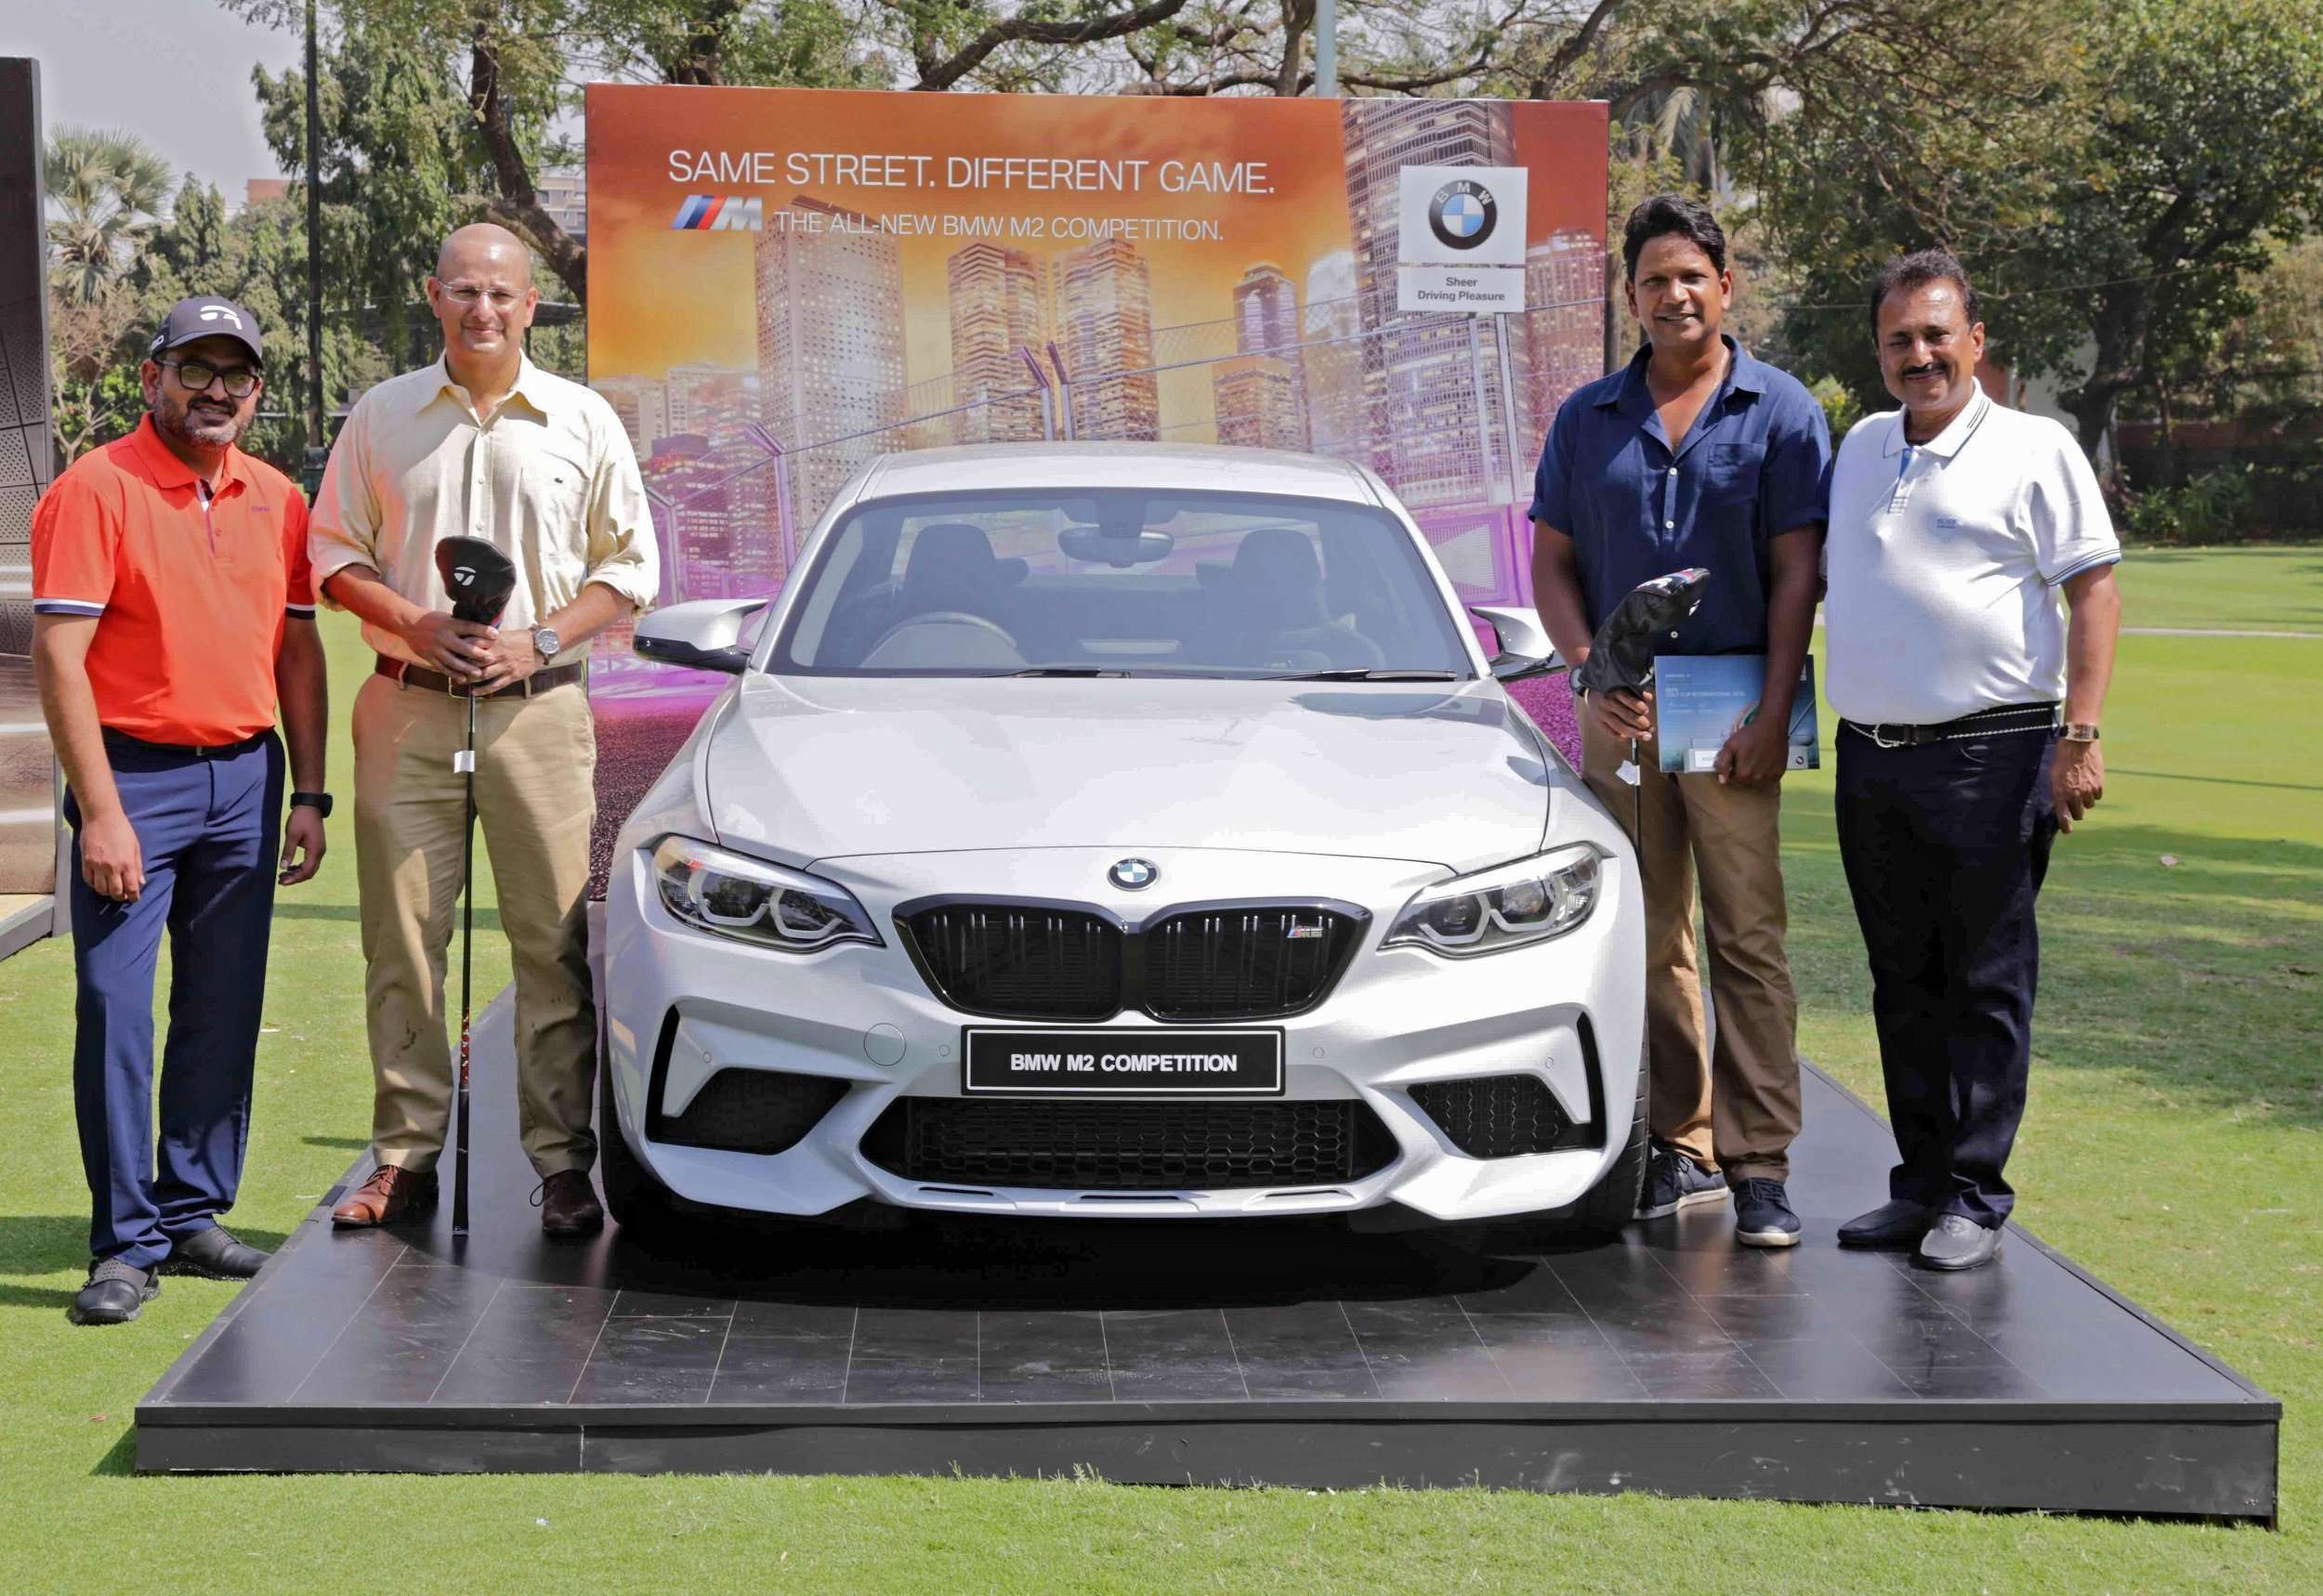 The BMW Golf Cup International 2019 Is One Cool Way To Enjoy The Sport! 1